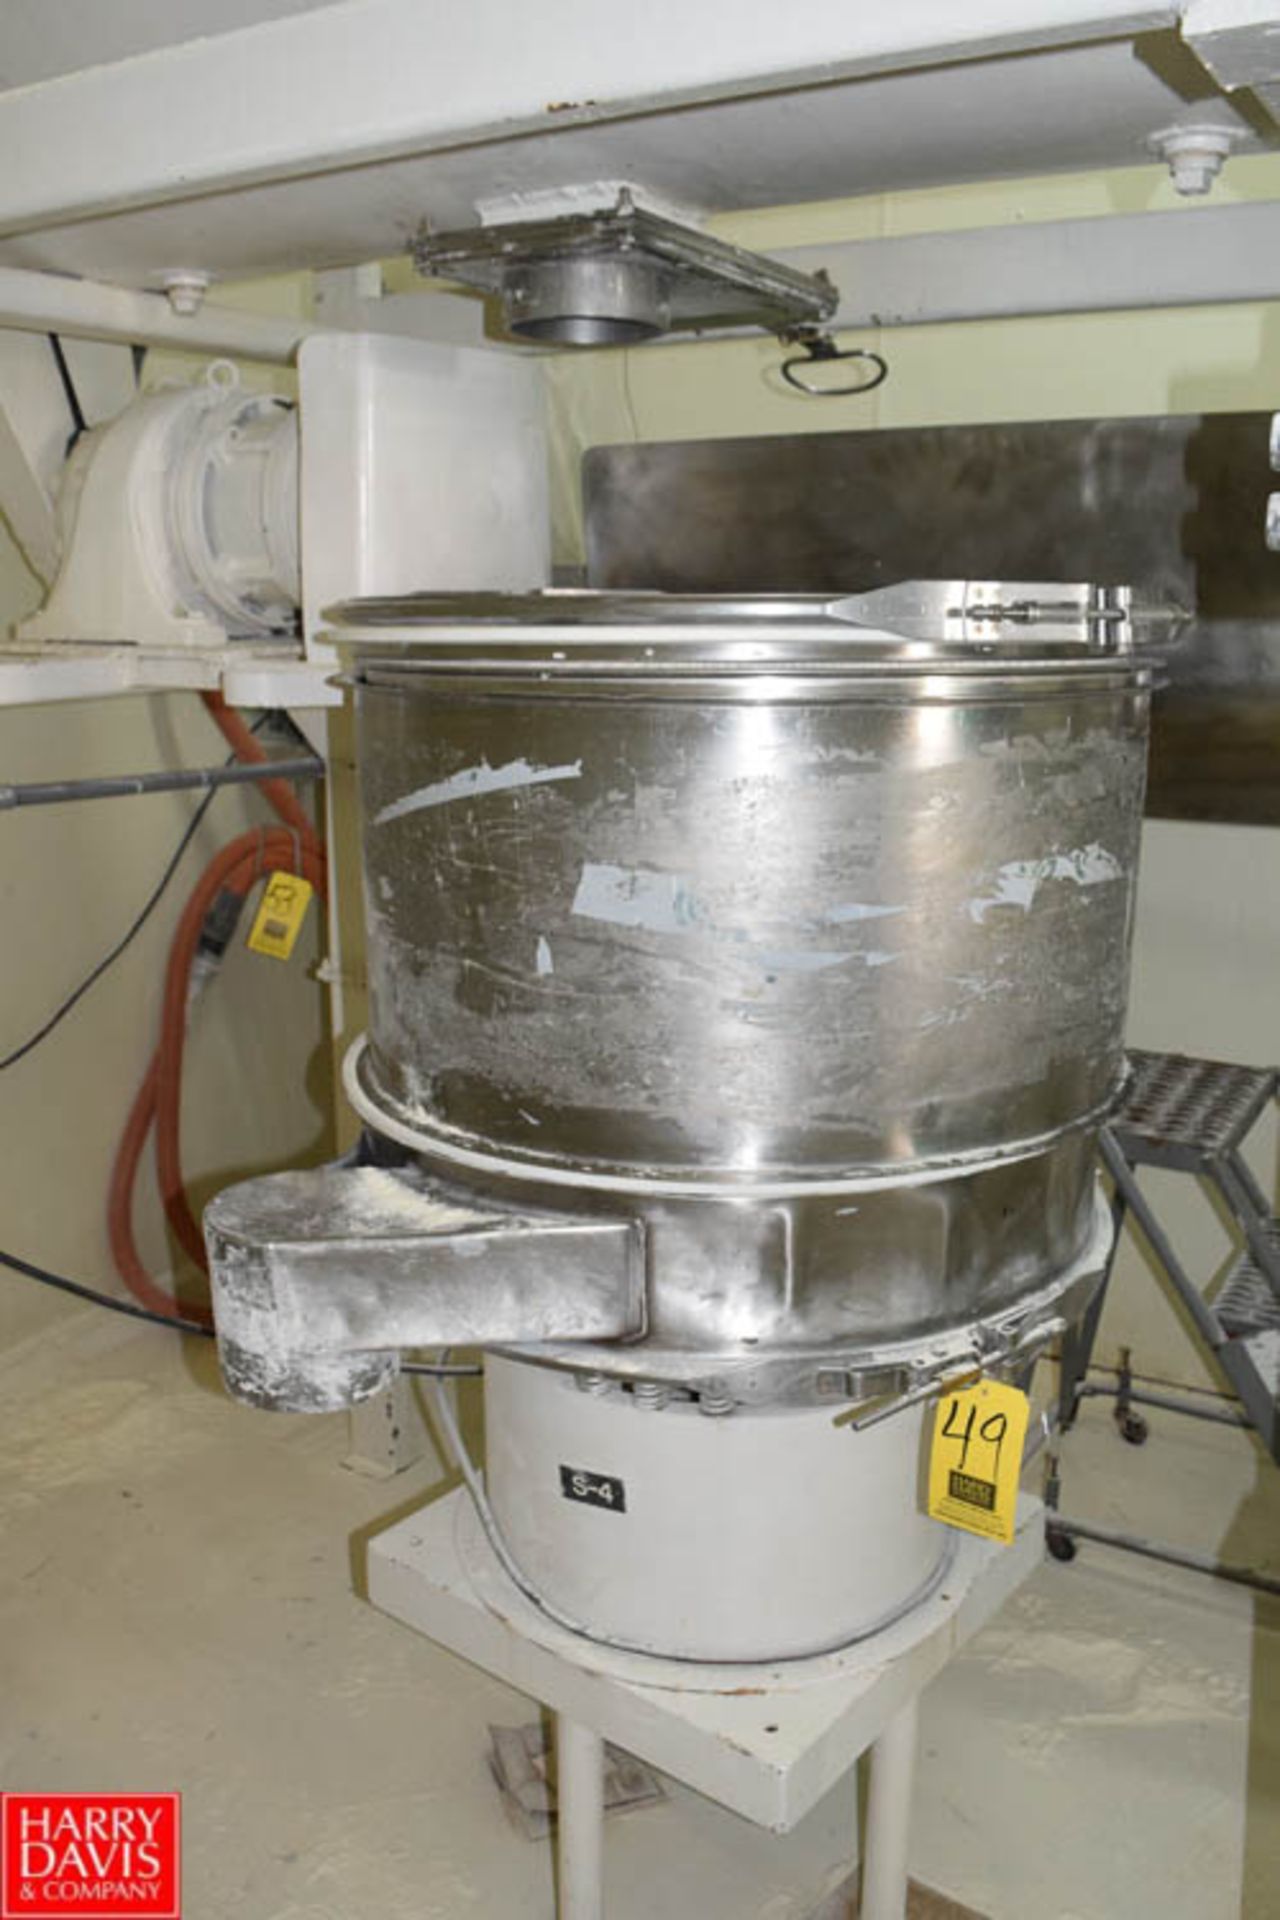 30" Vibratory Sifter- Rigging Fee: $250